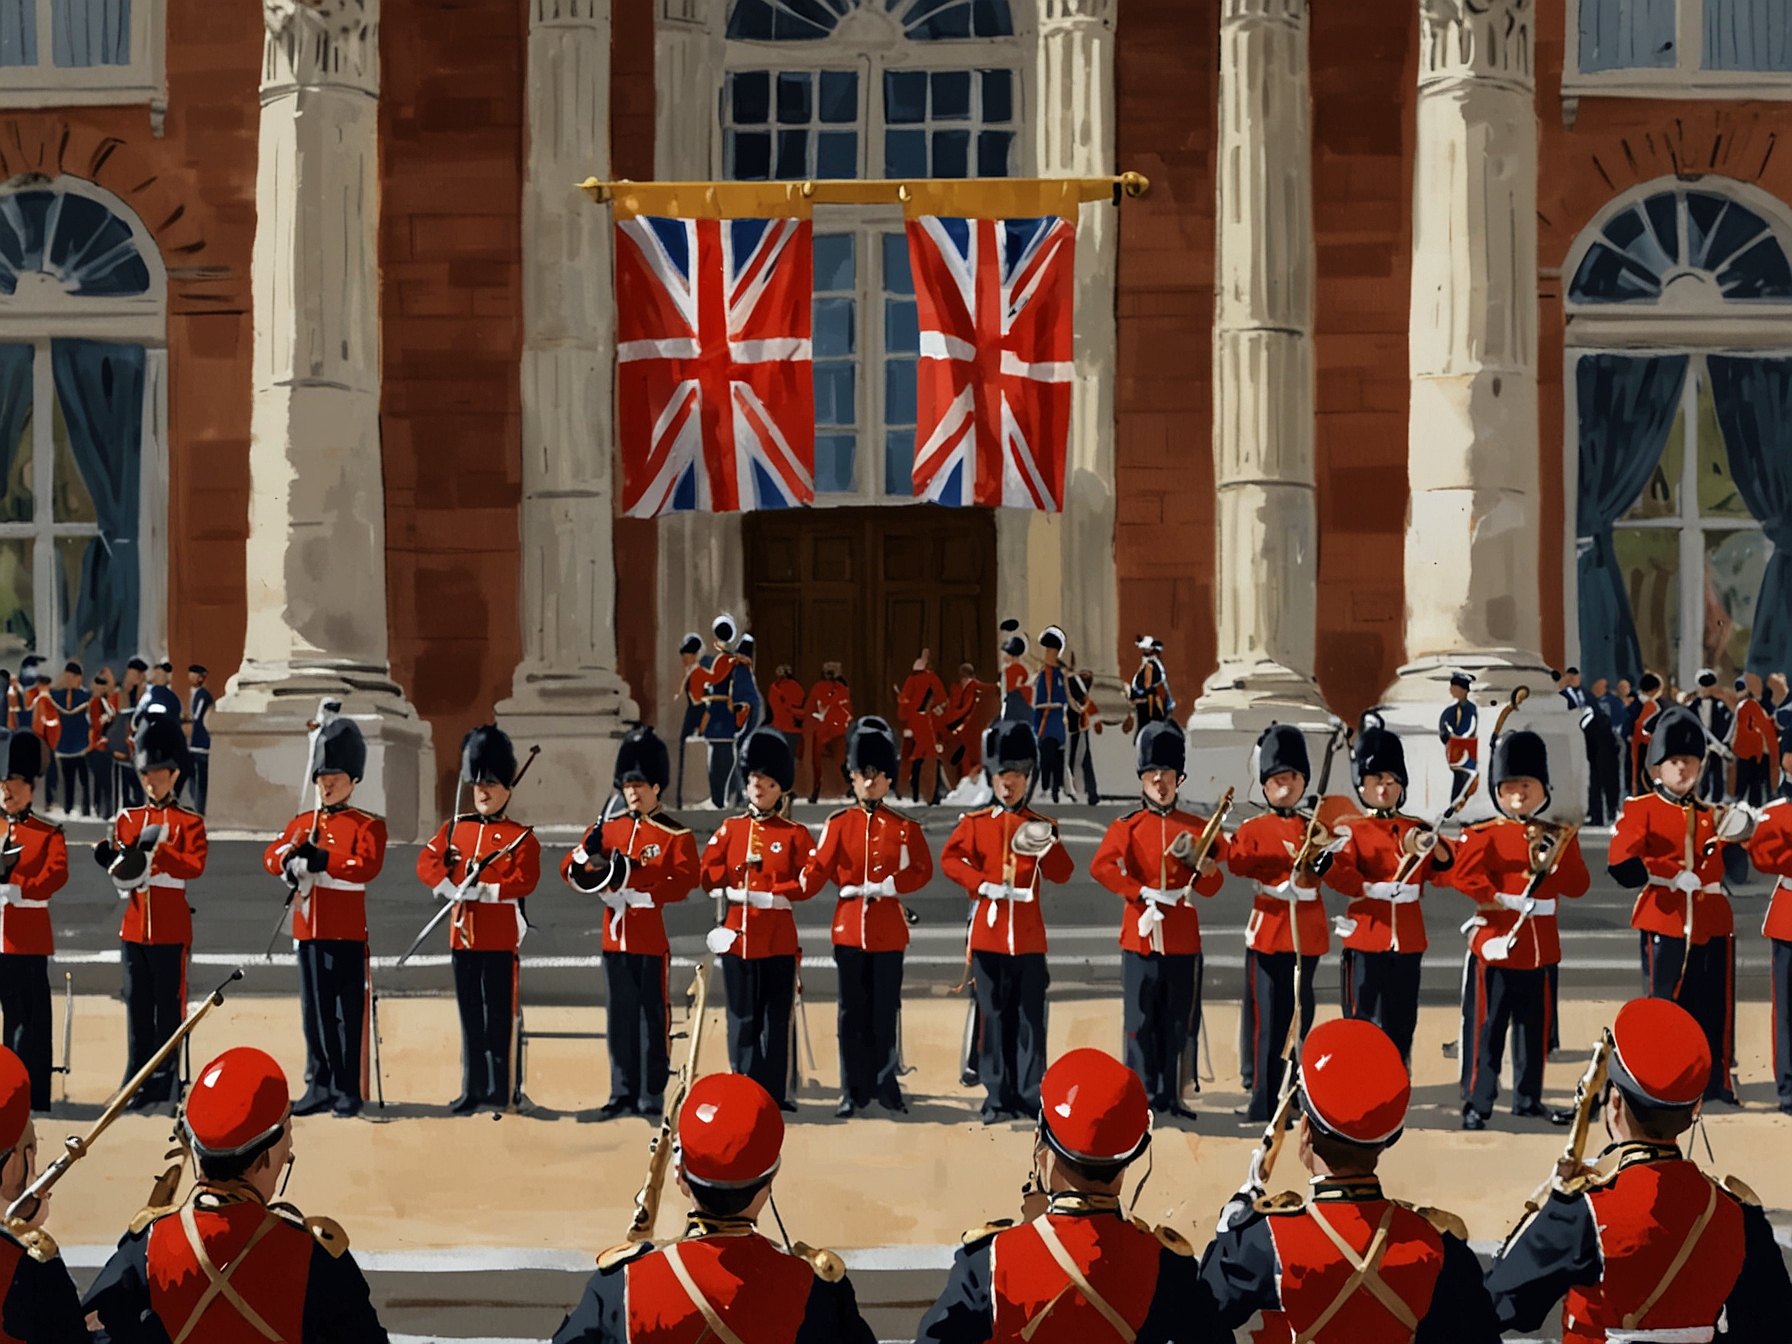 The British Army band performs Taylor Swift's hits during the traditional Changing of the Guard ceremony at Buckingham Palace, delighting a crowd of fans and visitors.